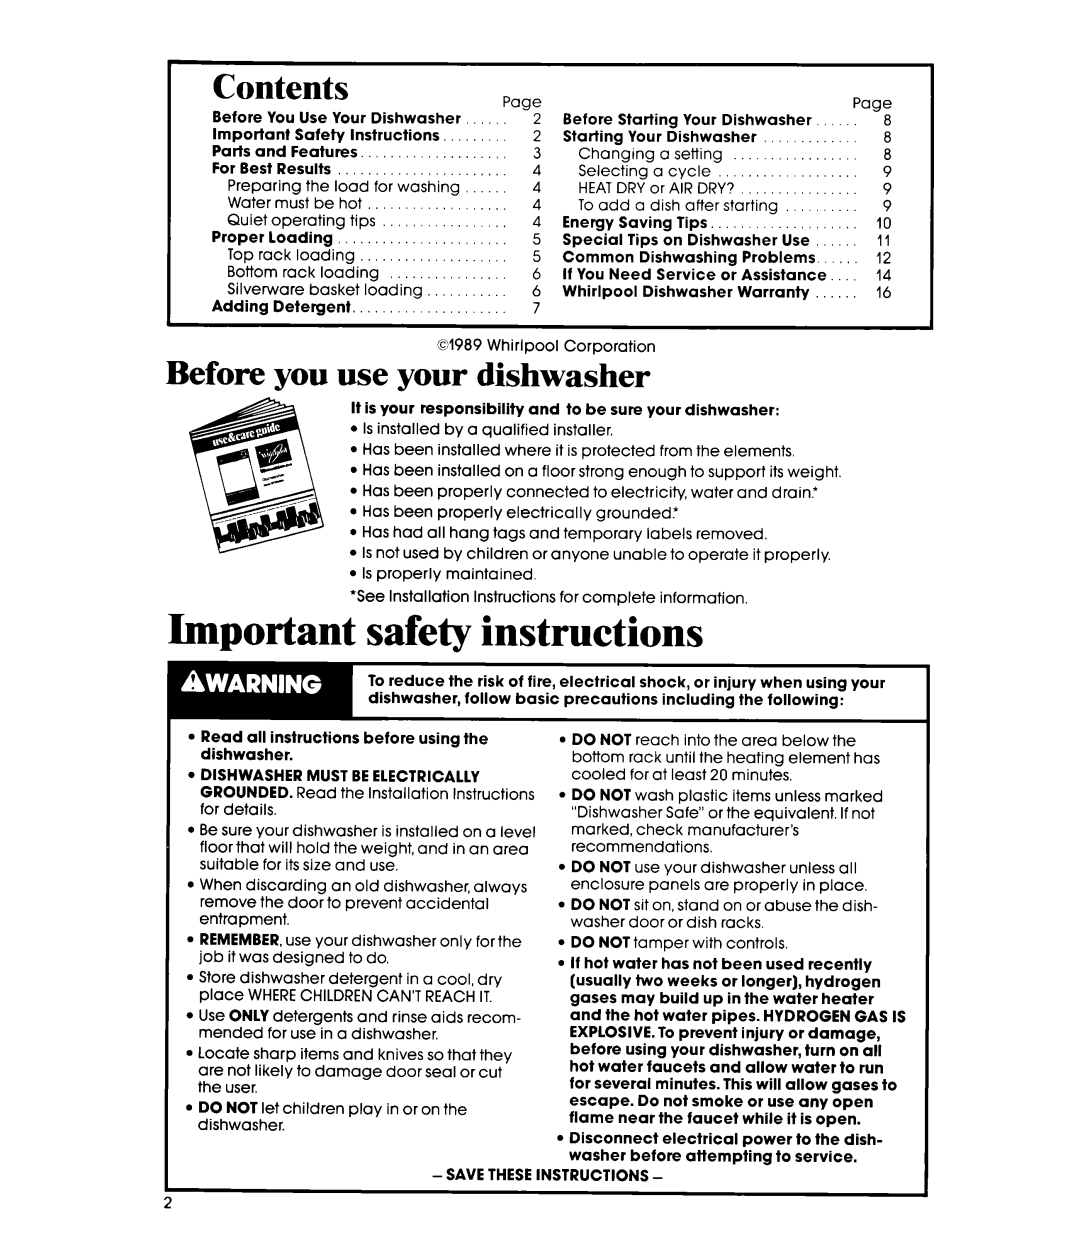 Whirlpool DU1800XT manual Important safety instructions, Contents, Before you use your dishwasher 